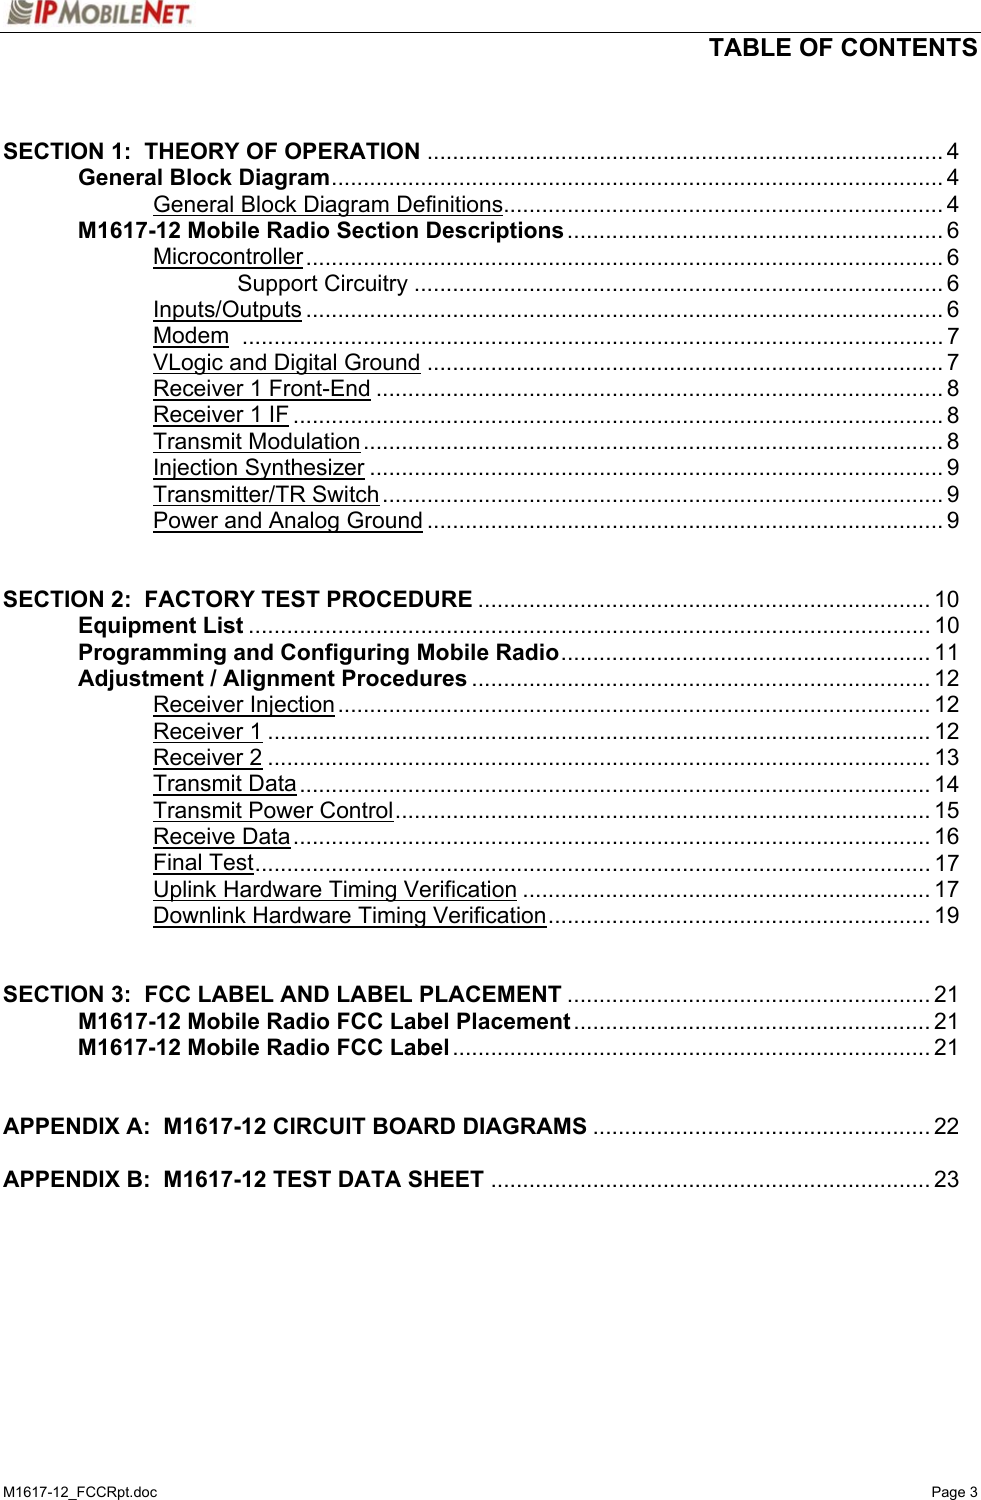   TABLE OF CONTENTS  M1617-12_FCCRpt.doc   Page 3   SECTION 1:  THEORY OF OPERATION ................................................................................. 4   General Block Diagram................................................................................................ 4     General Block Diagram Definitions..................................................................... 4  M1617-12 Mobile Radio Section Descriptions ........................................................... 6   Microcontroller.................................................................................................... 6     Support Circuitry ................................................................................... 6   Inputs/Outputs .................................................................................................... 6   Modem .............................................................................................................. 7   VLogic and Digital Ground ................................................................................. 7   Receiver 1 Front-End ......................................................................................... 8   Receiver 1 IF ...................................................................................................... 8   Transmit Modulation........................................................................................... 8   Injection Synthesizer .......................................................................................... 9   Transmitter/TR Switch........................................................................................ 9     Power and Analog Ground ................................................................................. 9   SECTION 2:  FACTORY TEST PROCEDURE ....................................................................... 10  Equipment List ........................................................................................................... 10   Programming and Configuring Mobile Radio.......................................................... 11   Adjustment / Alignment Procedures ........................................................................ 12   Receiver Injection............................................................................................. 12   Receiver 1........................................................................................................ 12   Receiver 2........................................................................................................ 13   Transmit Data................................................................................................... 14   Transmit Power Control.................................................................................... 15   Receive Data.................................................................................................... 16   Final Test.......................................................................................................... 17     Uplink Hardware Timing Verification ................................................................ 17     Downlink Hardware Timing Verification............................................................ 19   SECTION 3:  FCC LABEL AND LABEL PLACEMENT ......................................................... 21   M1617-12 Mobile Radio FCC Label Placement ........................................................ 21  M1617-12 Mobile Radio FCC Label........................................................................... 21   APPENDIX A:  M1617-12 CIRCUIT BOARD DIAGRAMS ..................................................... 22  APPENDIX B:  M1617-12 TEST DATA SHEET ..................................................................... 23   